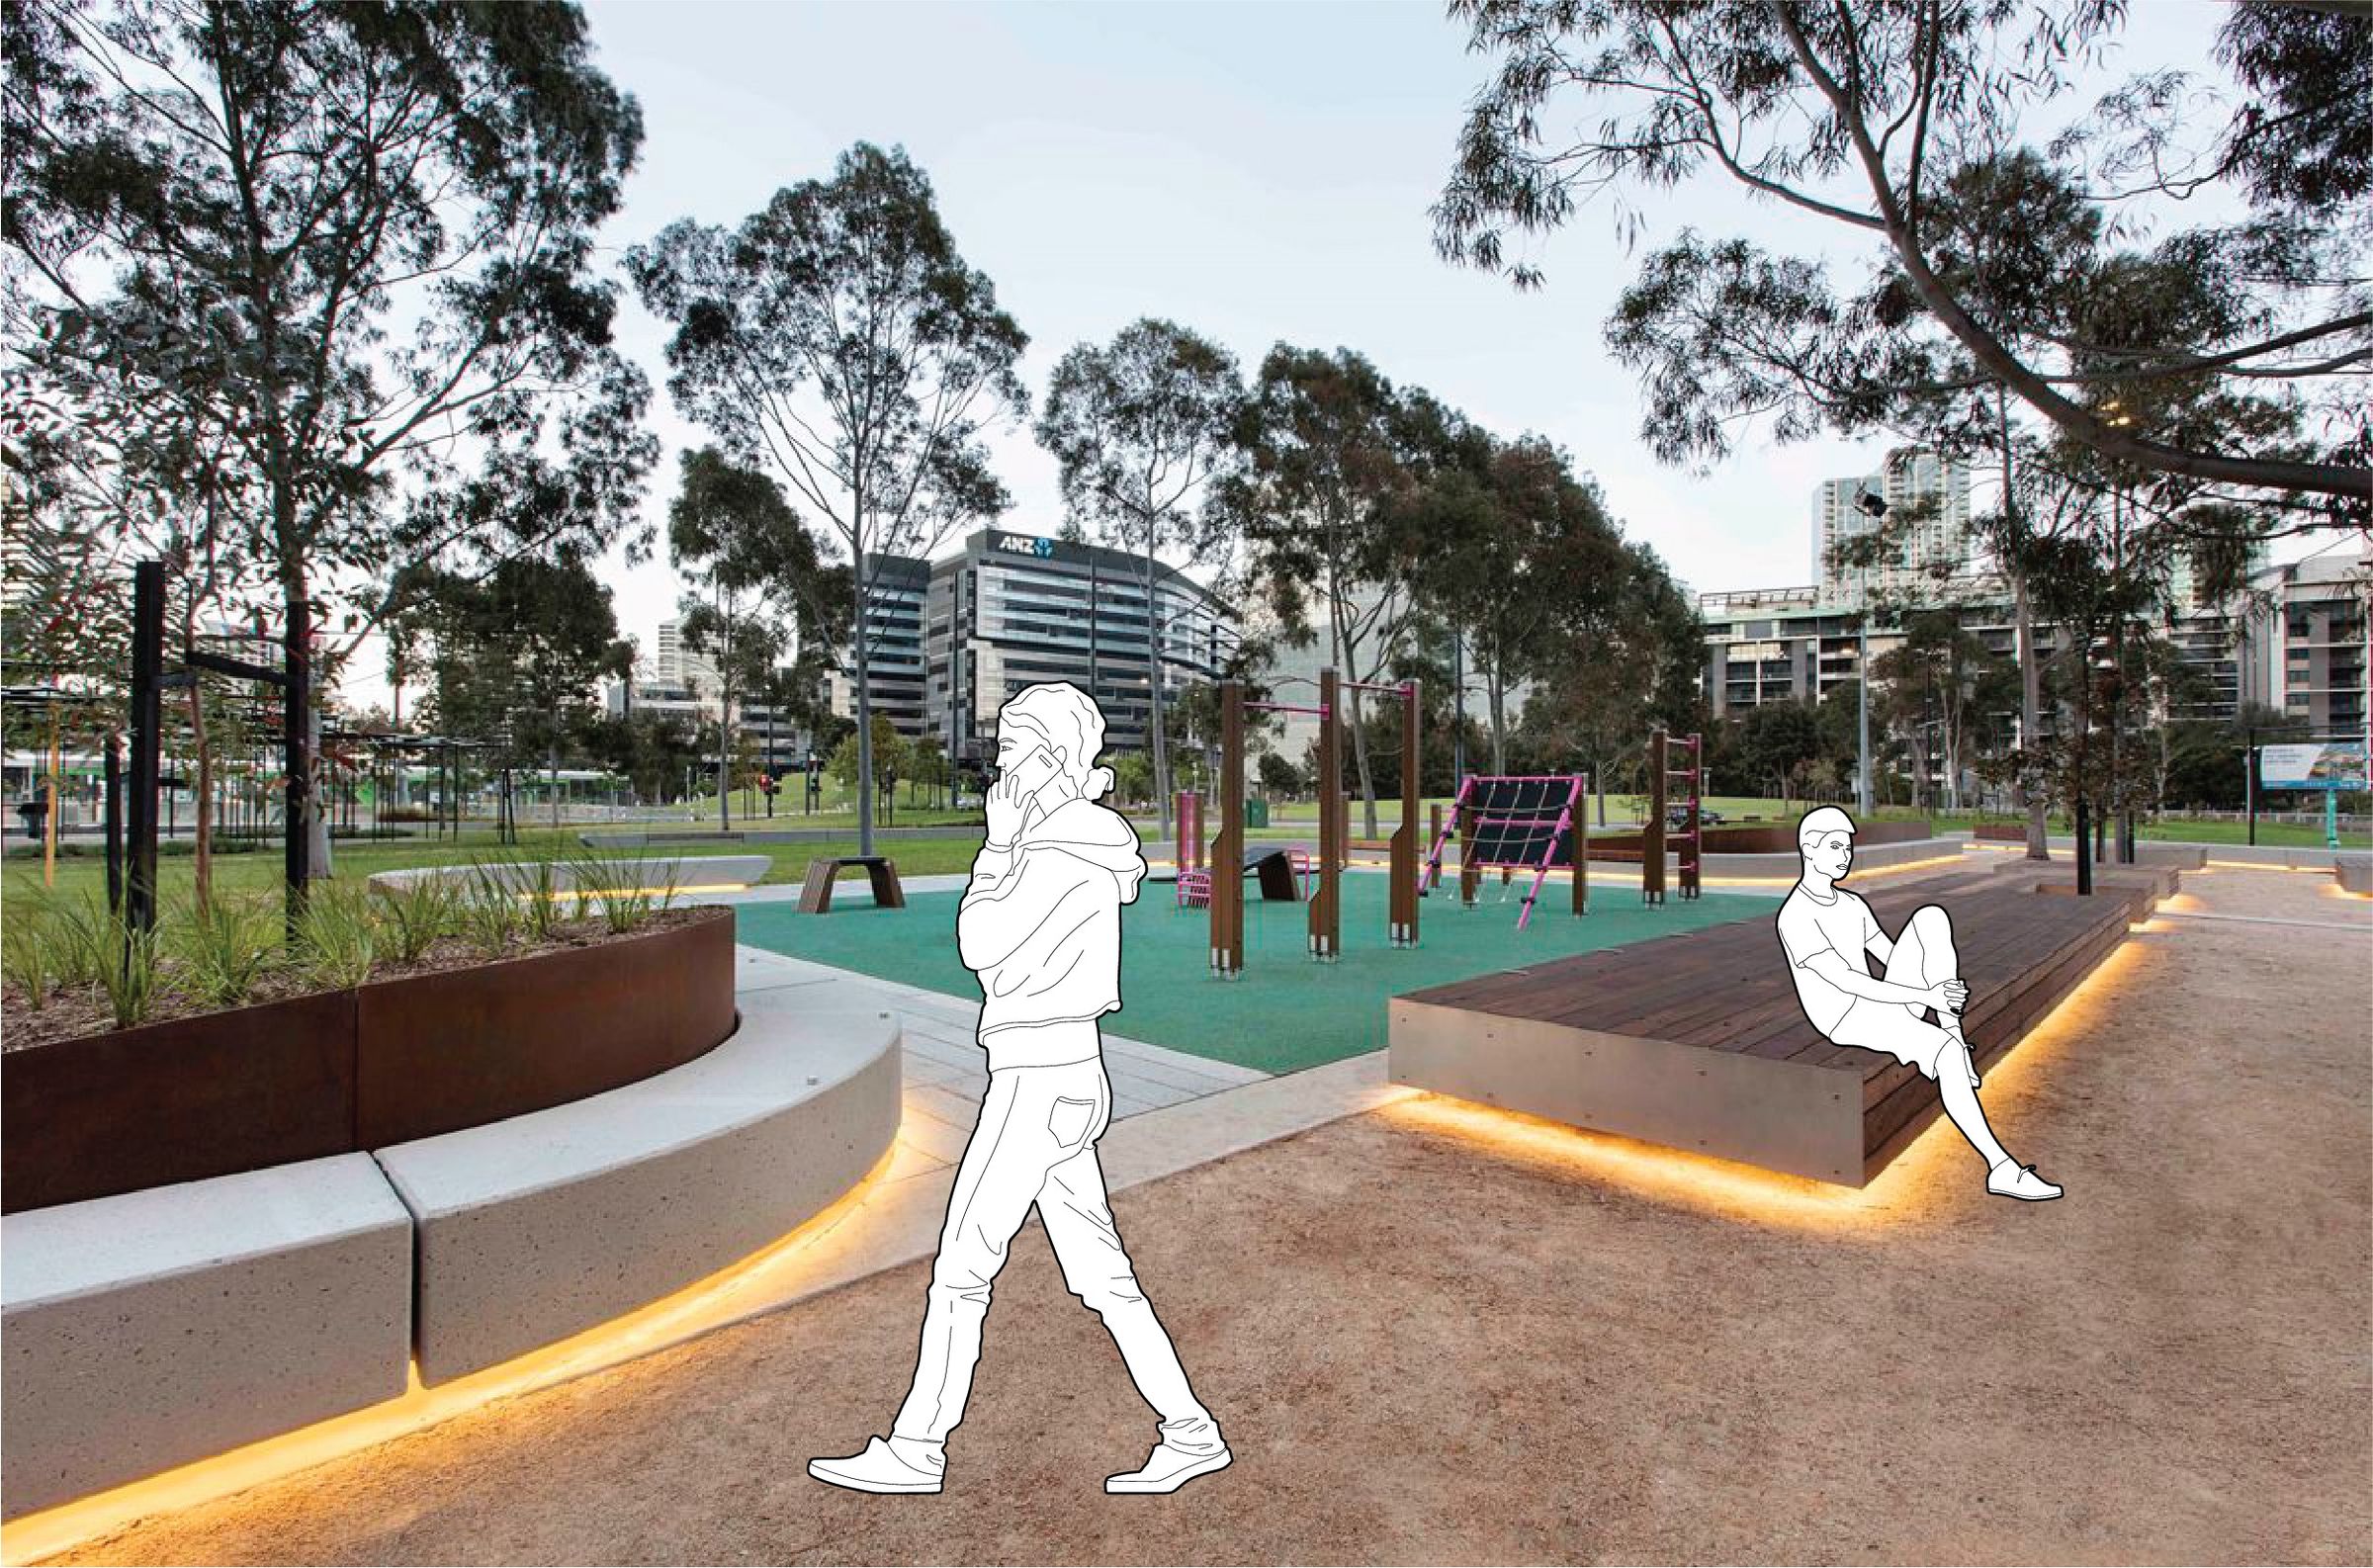 A park with a playground, trees and benches for sitting